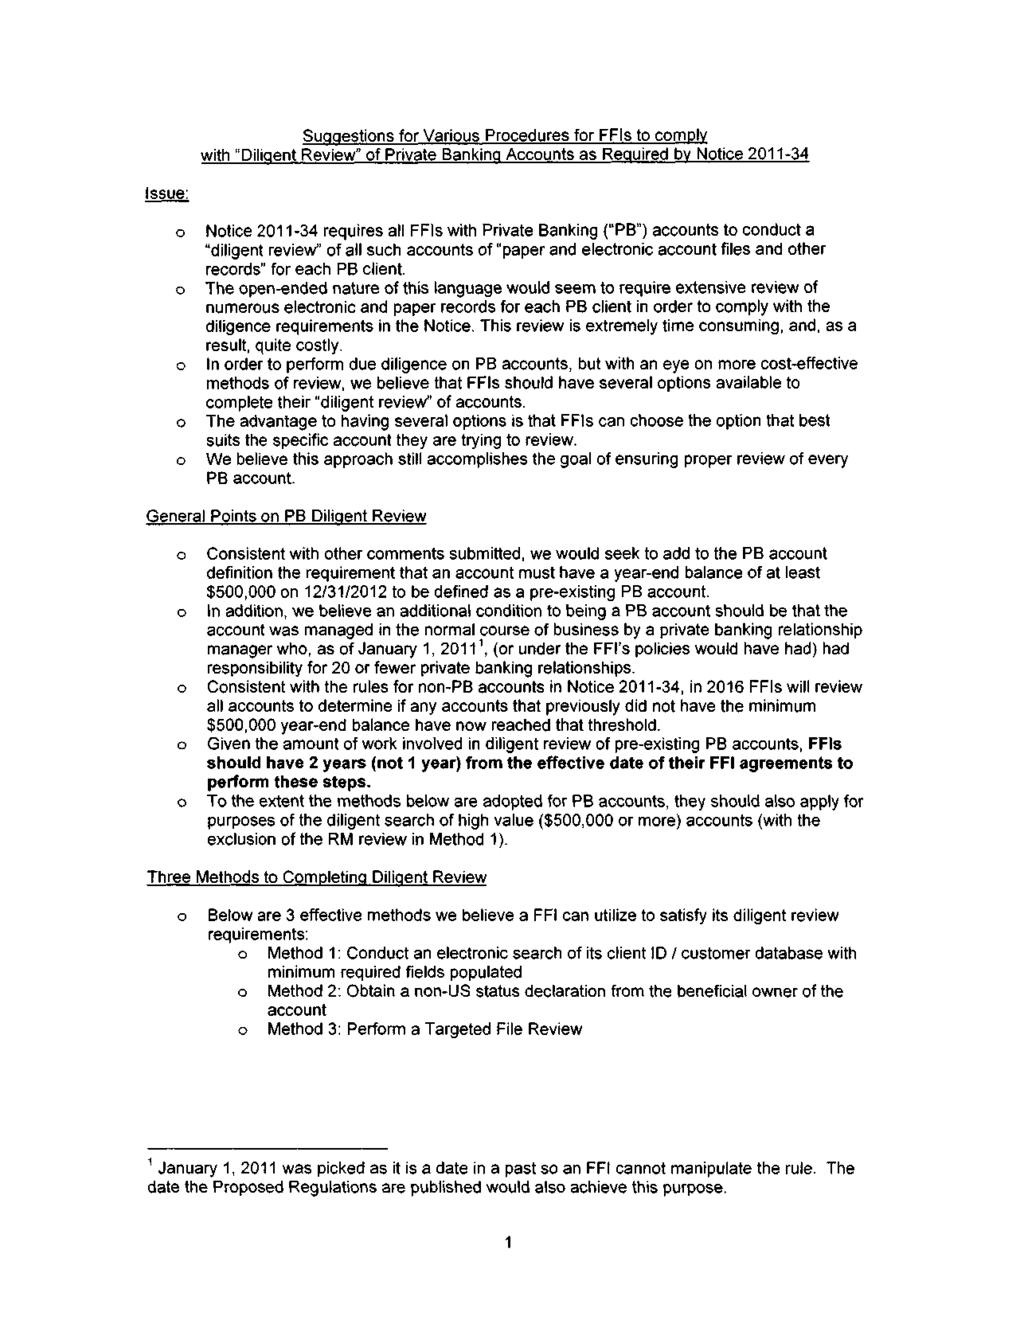 Dc 2011-20523 (6 pgs) Suggestins fr Varius Prcedures fr FFIs t cmply with "Diligent Review" f Private Banking Accunts as Required by Ntice 2011-34 Issue: Ntice 2011-34 requires all FFIs with Private